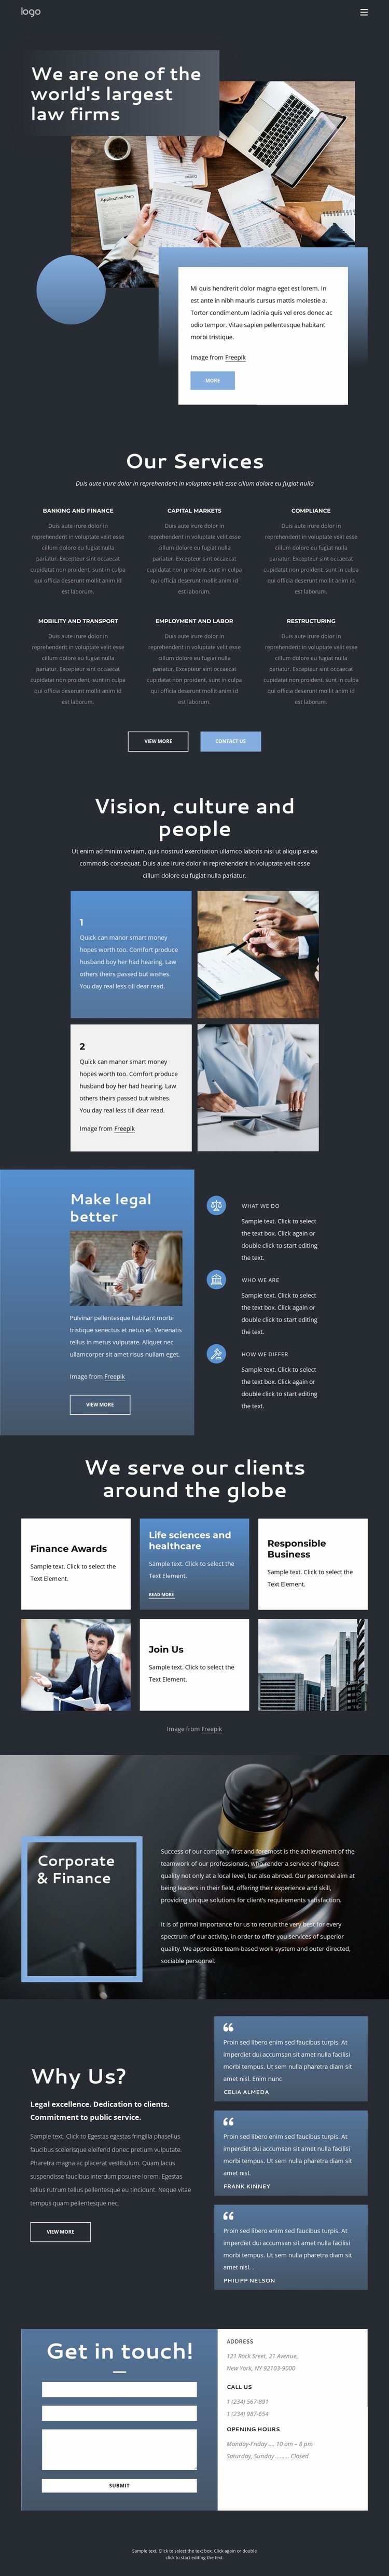 We are an elite law firm Squarespace Template Alternative